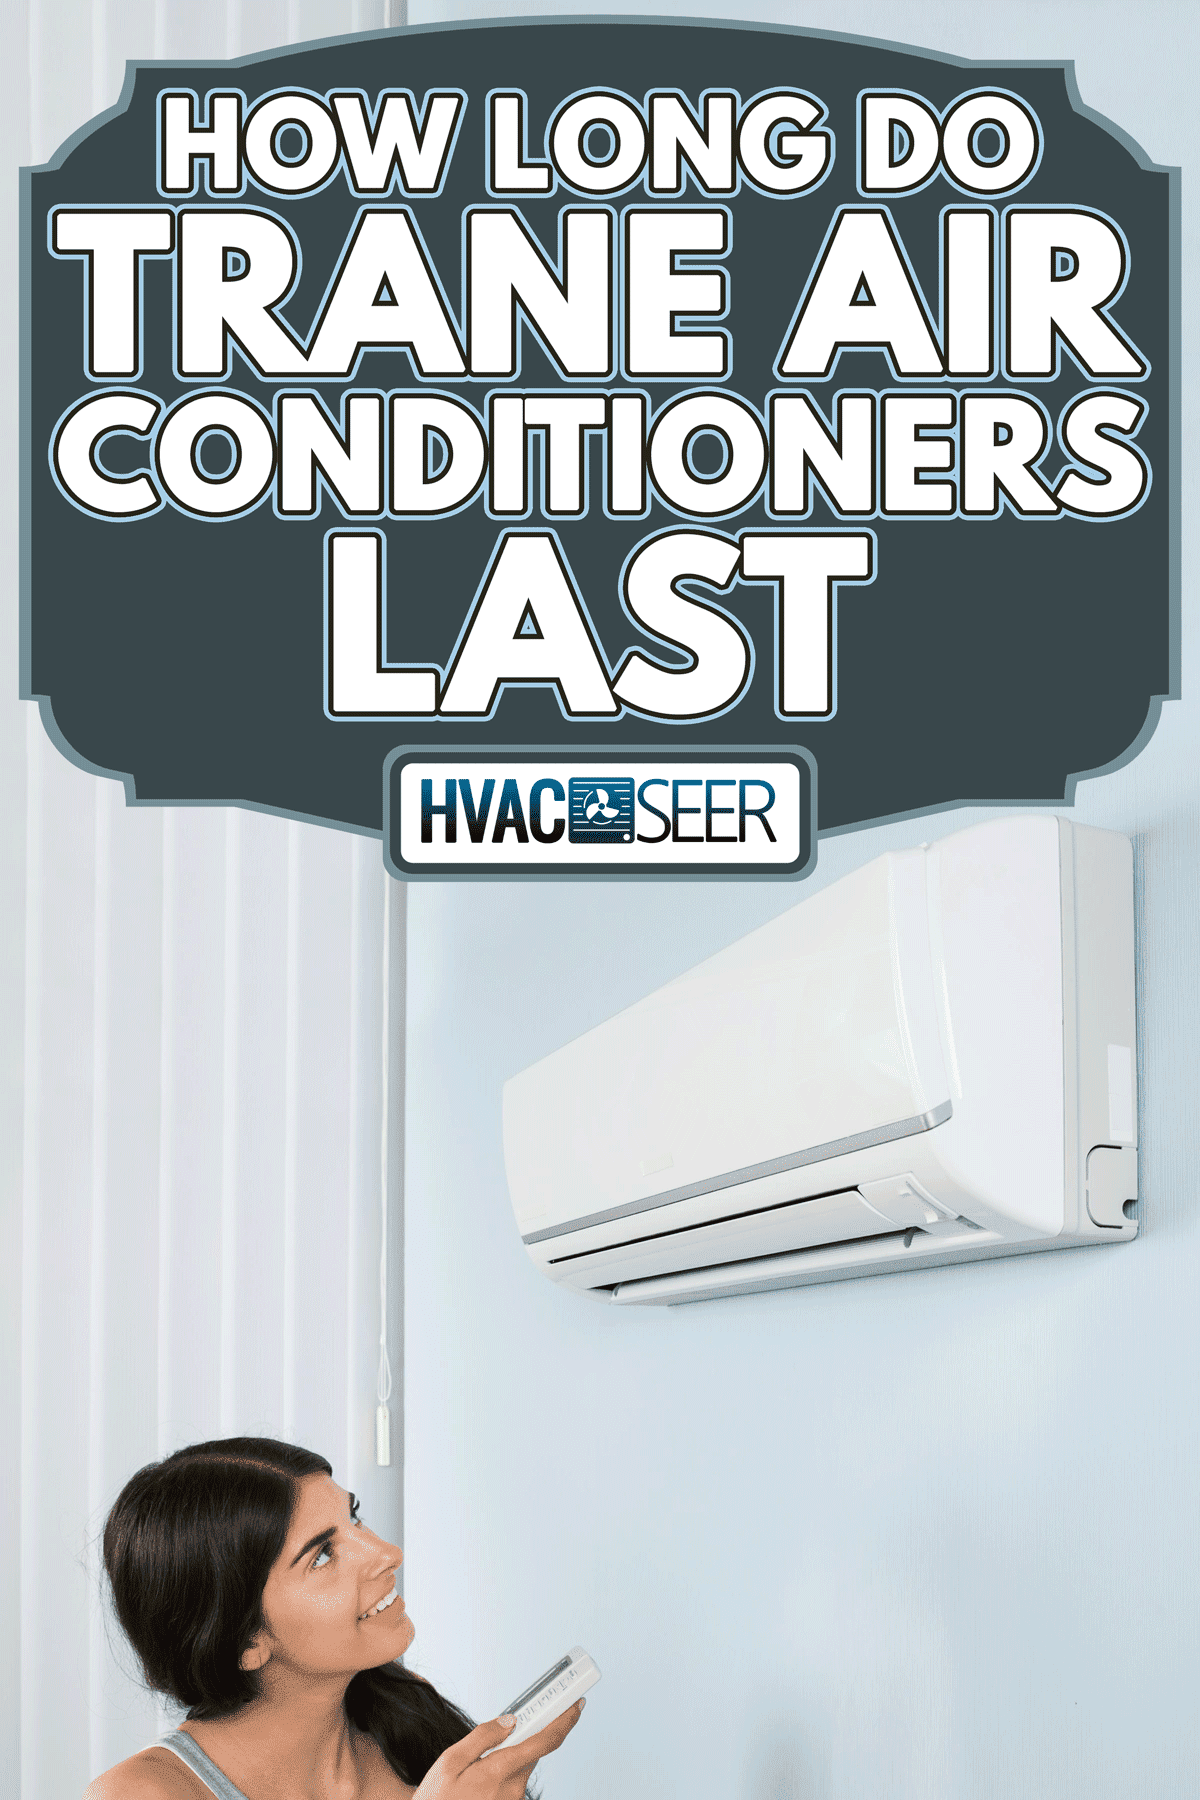 Woman holding remote control air conditioner in house, How Long Do Trane Air Conditioners Last